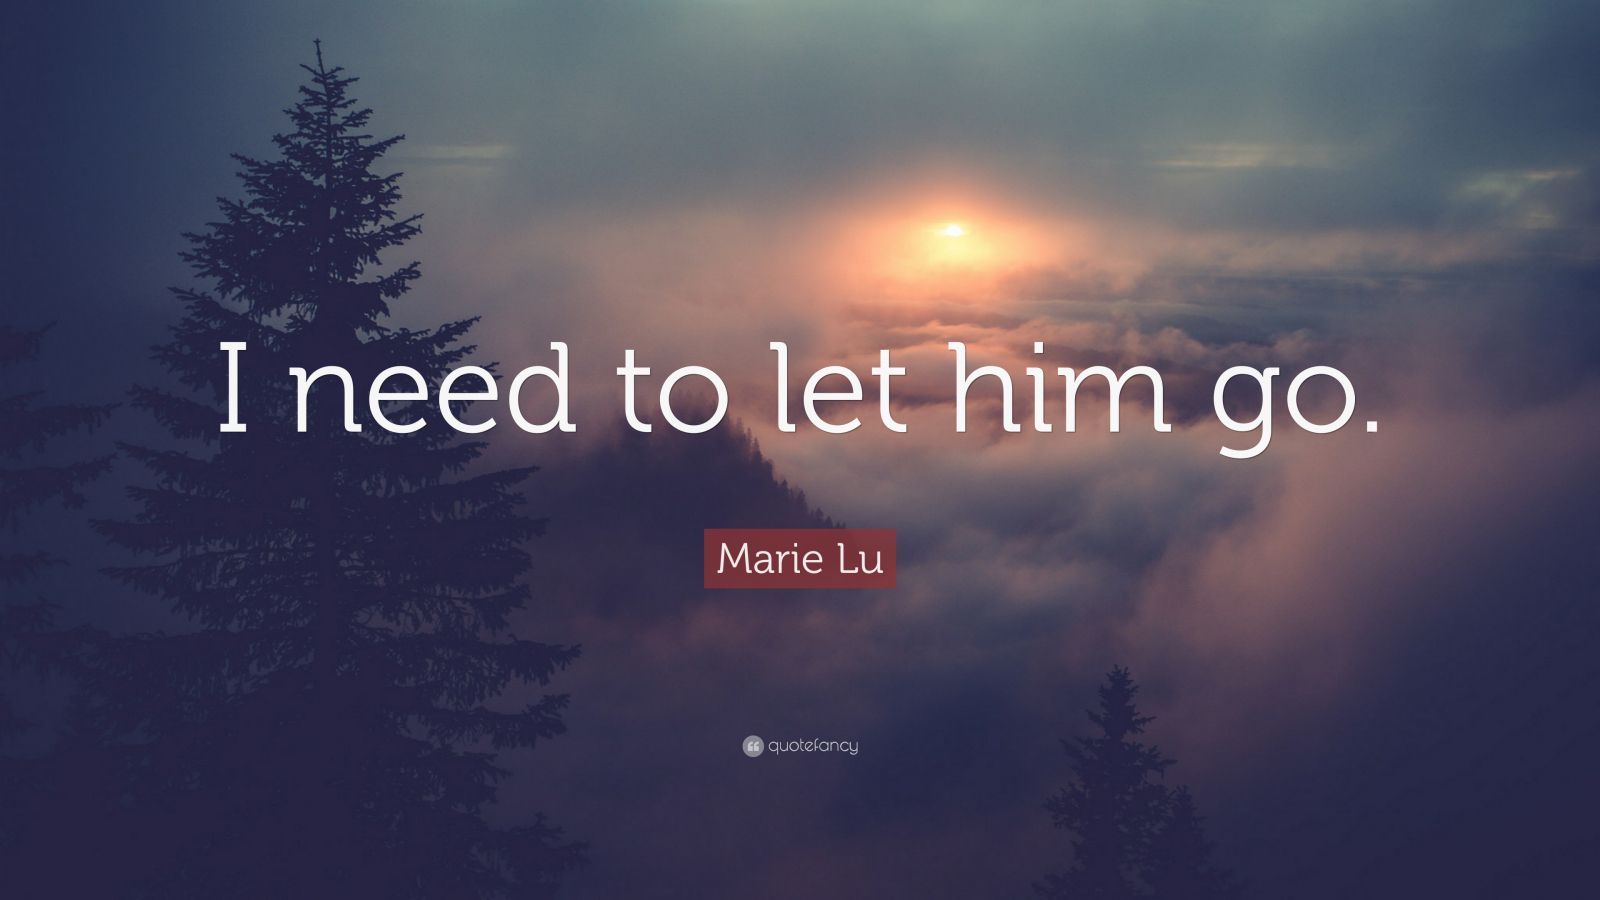 Marie Lu Quote: “I need to let him go.”